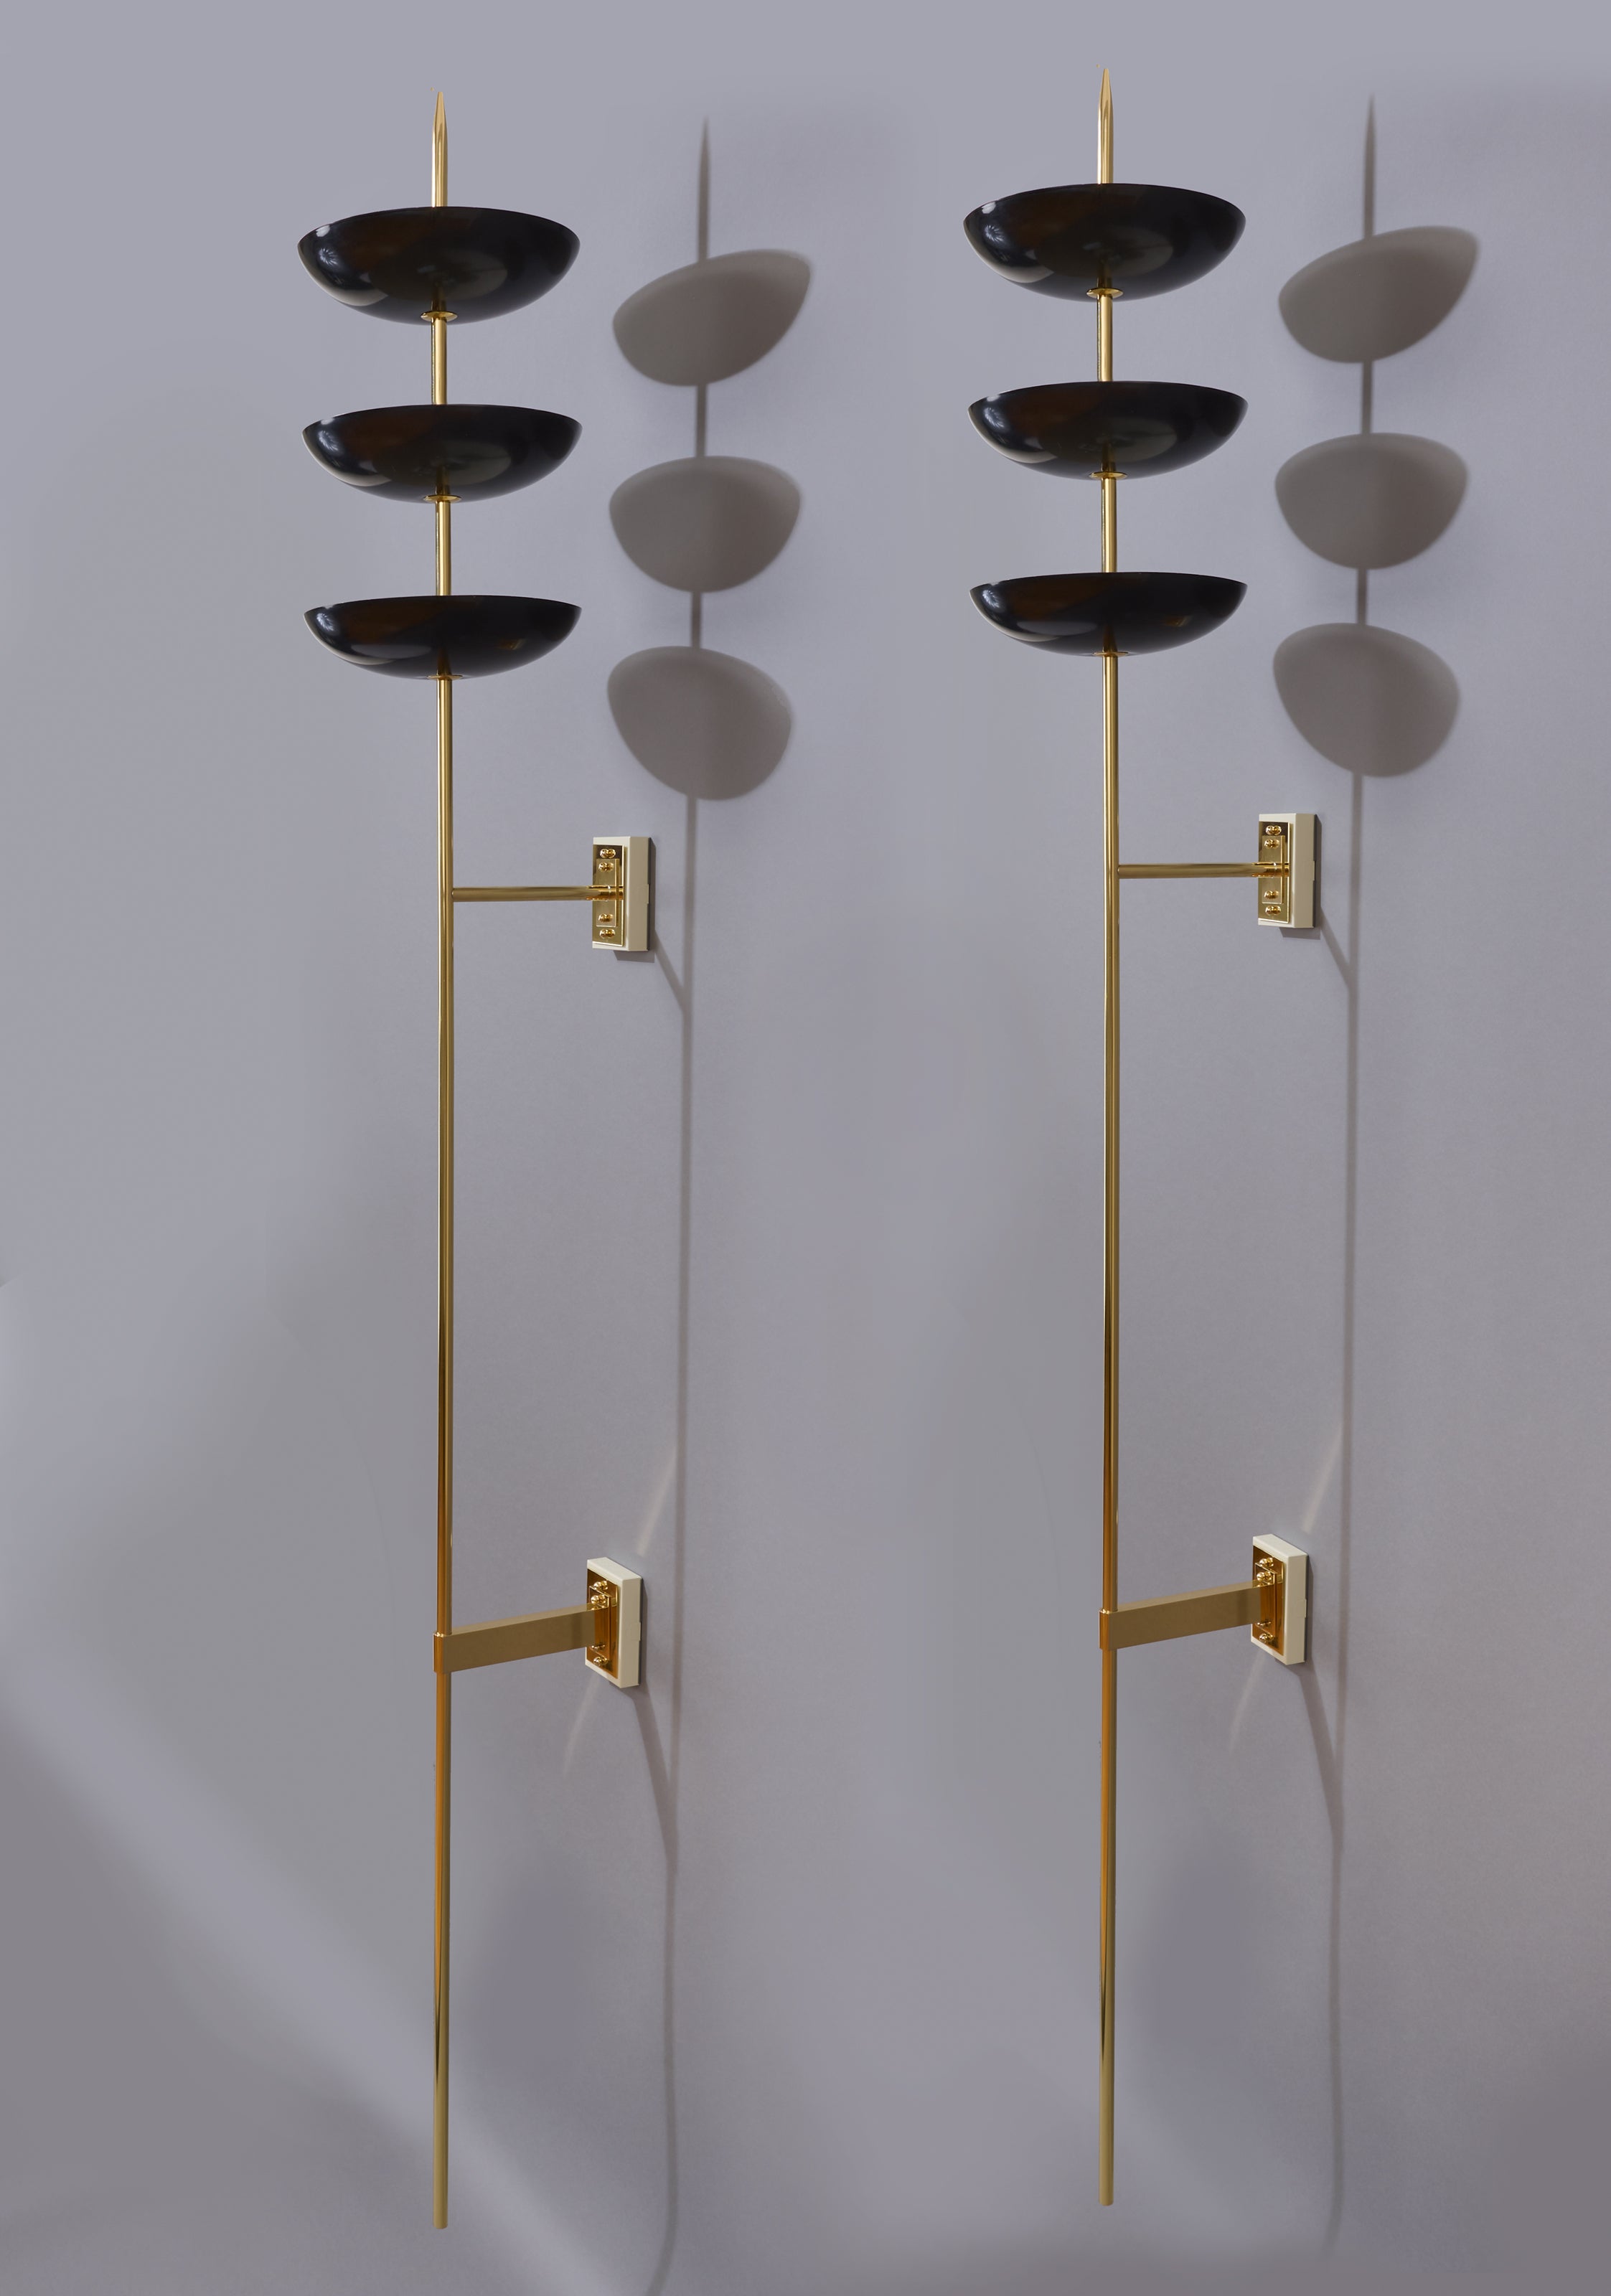 Stilnovo, Massive Pair of Three Bowl Sconces in Brass and Enamel, Italy, 1950s For Sale